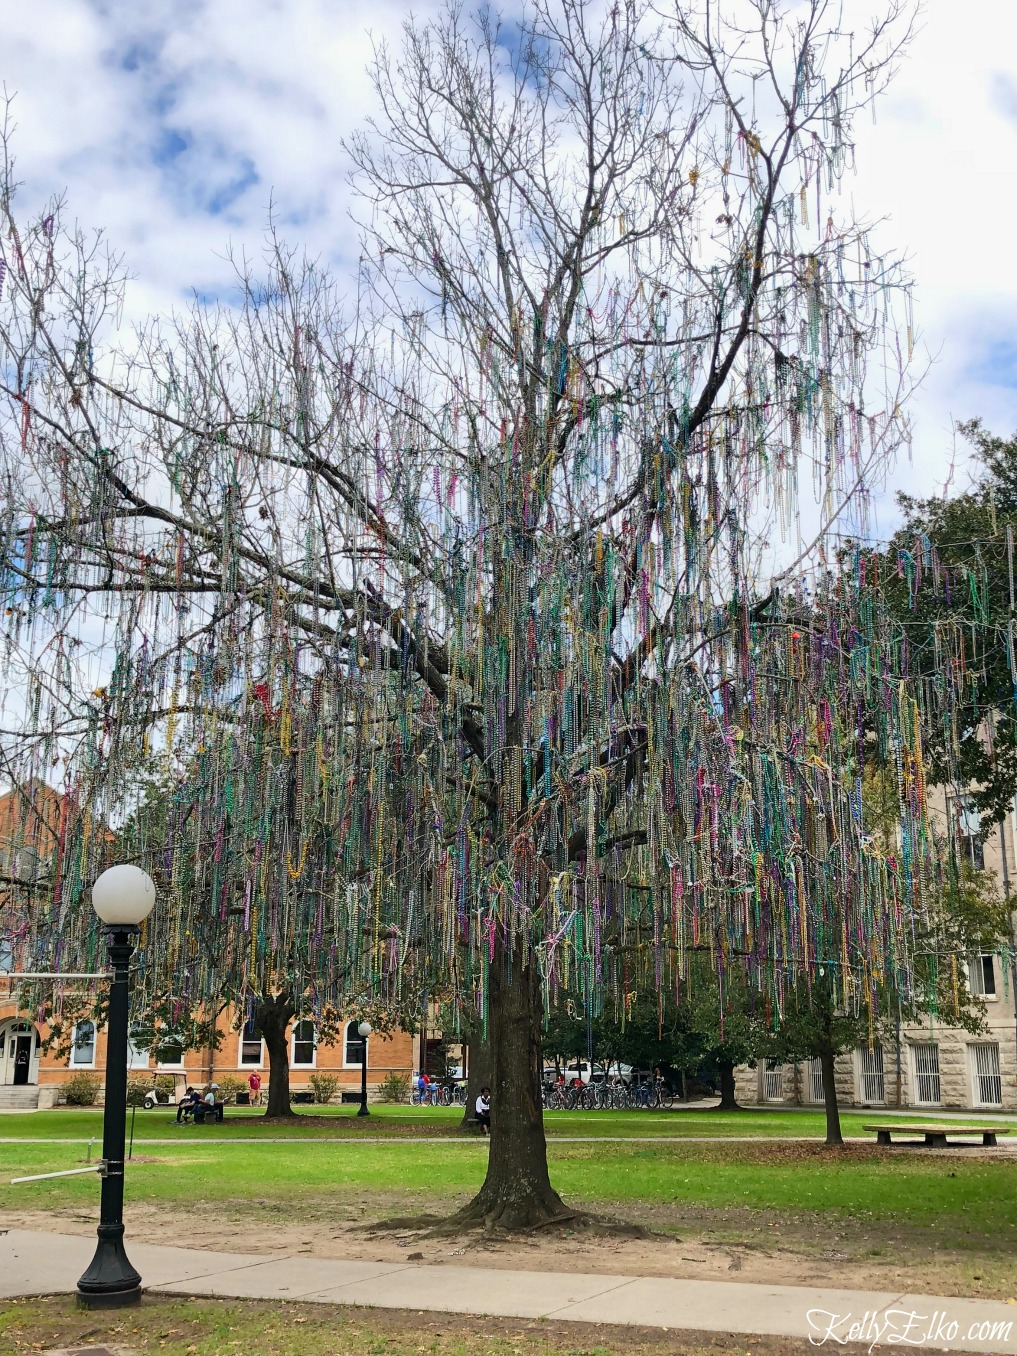 Best of New Orleans - what to see, do and eat. The bead tree on the Tulane University campus is a sight to see after Mardi Gras! kellyelko.com #neworleans #nola #travel #vacation #tulane